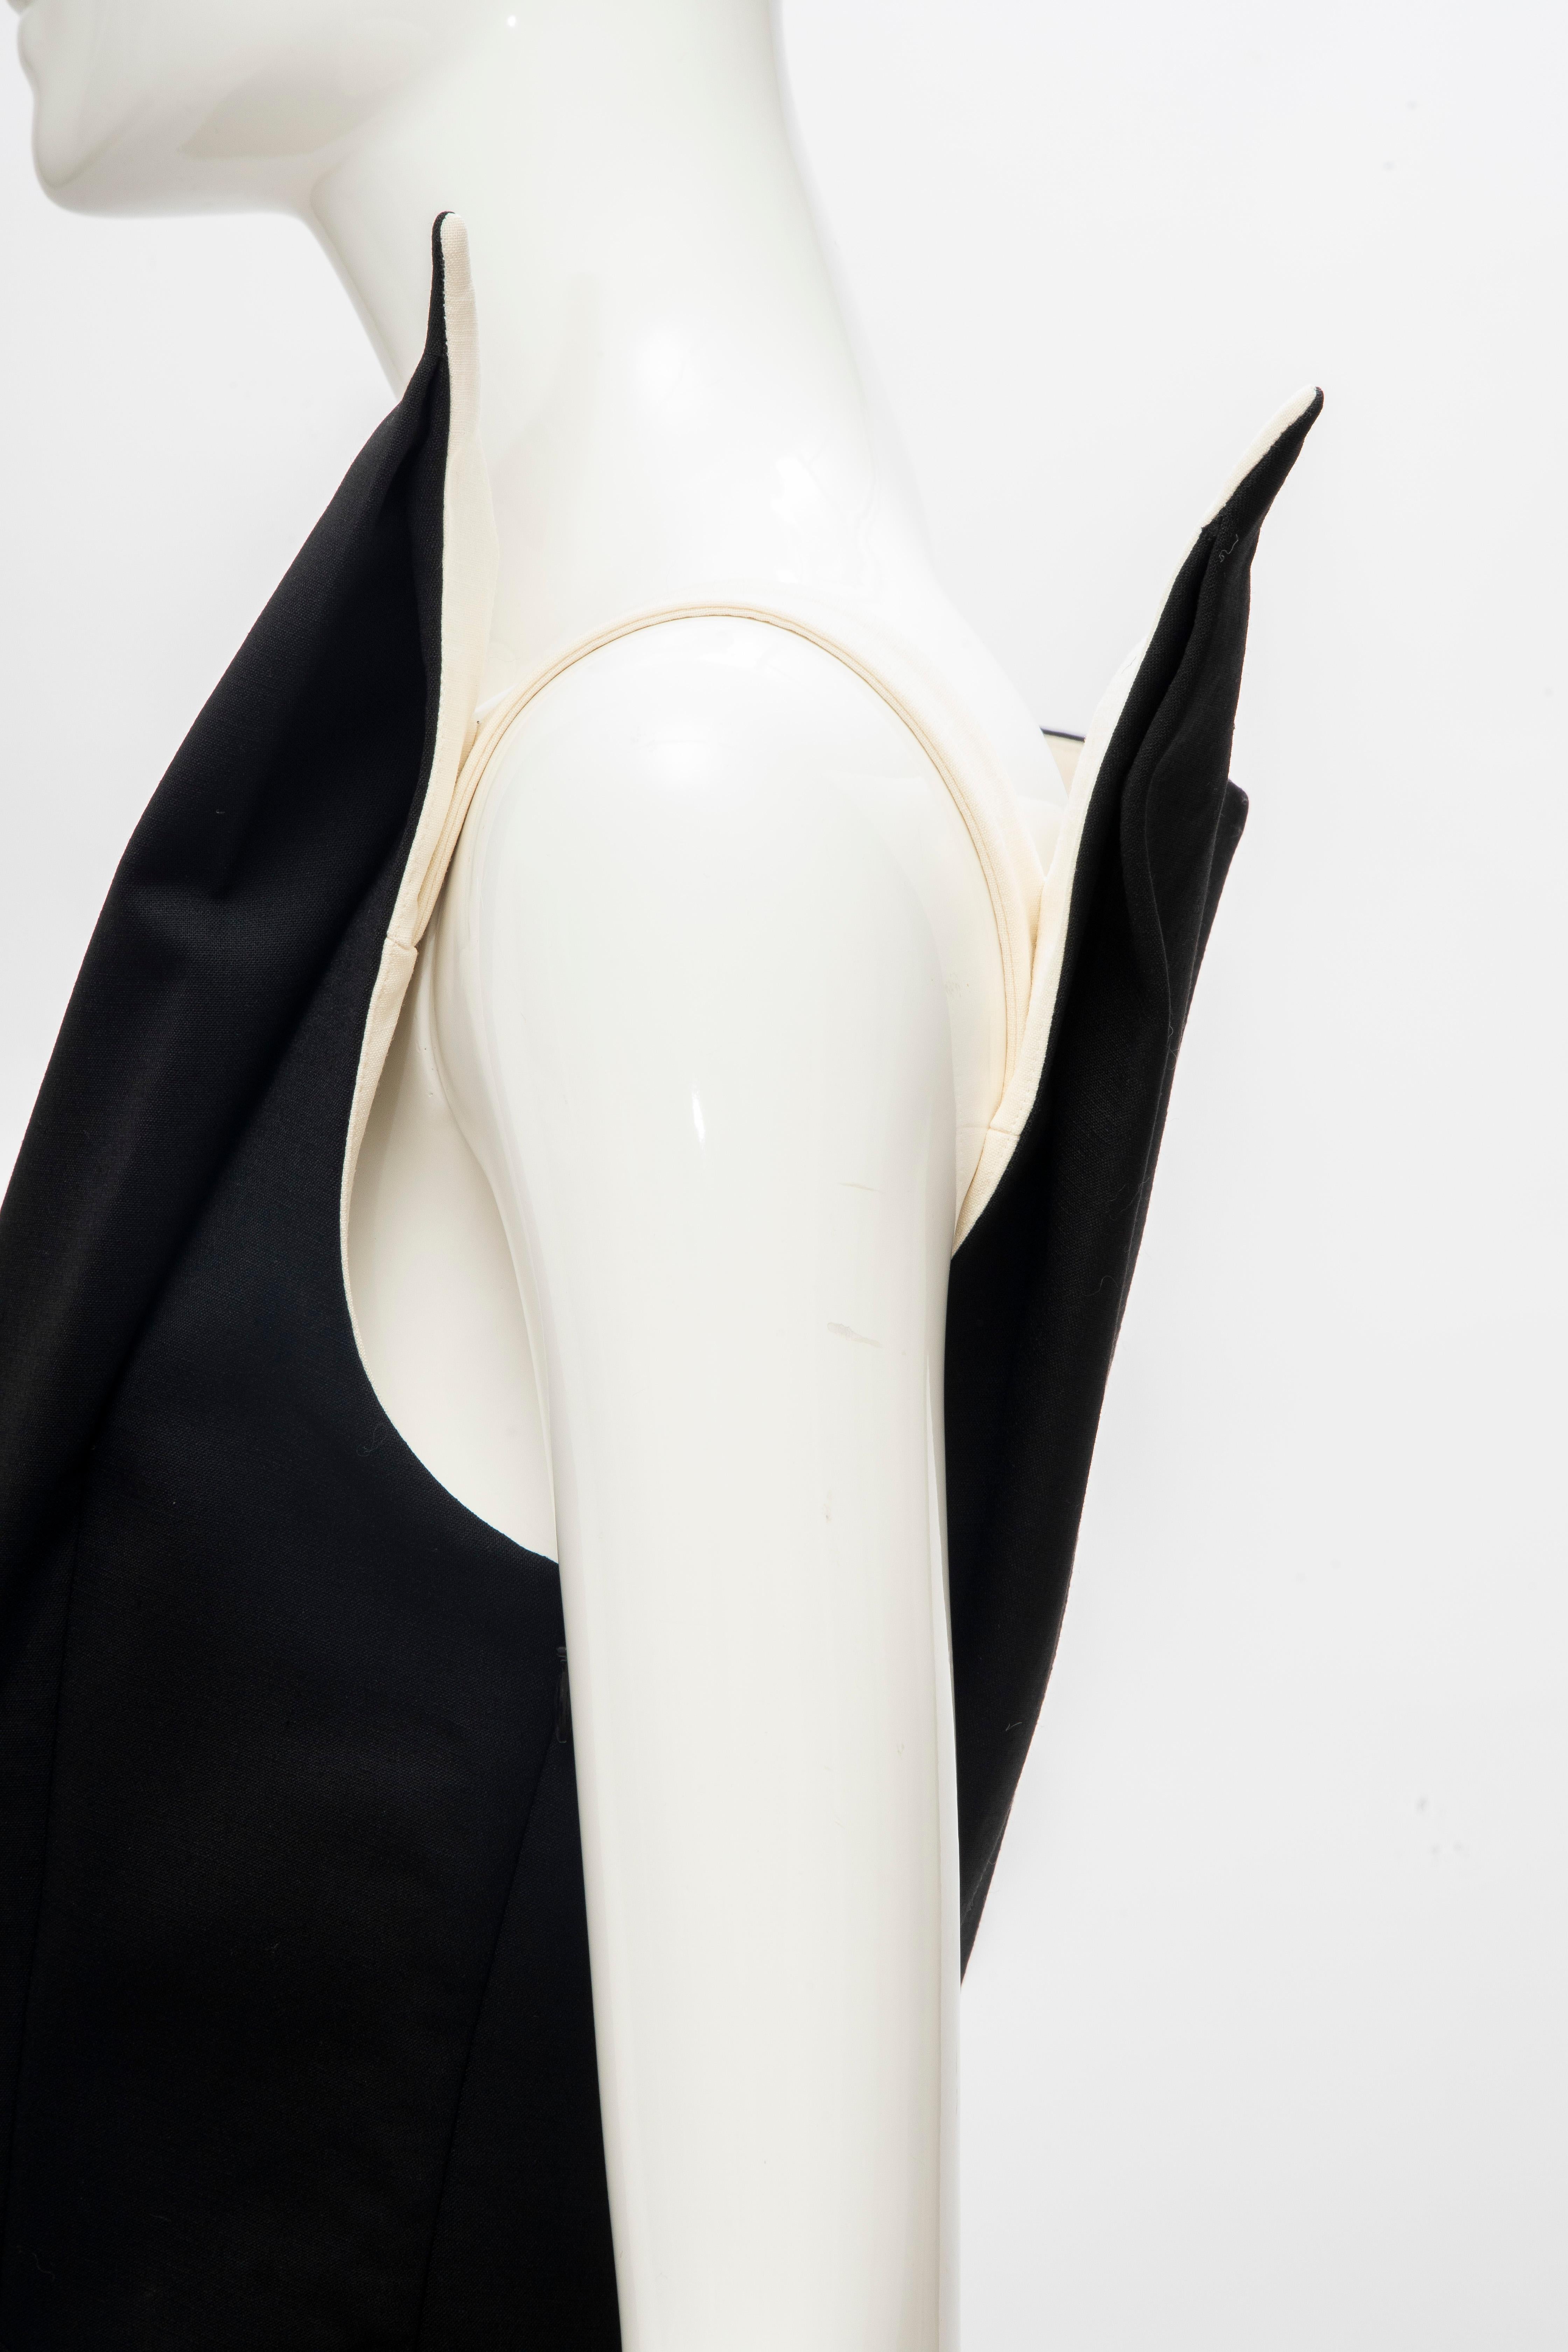 Raf Simons for Jil Sander Runway Black Wool Sculptural Evening Dress, Fall 2009 In Excellent Condition For Sale In Cincinnati, OH